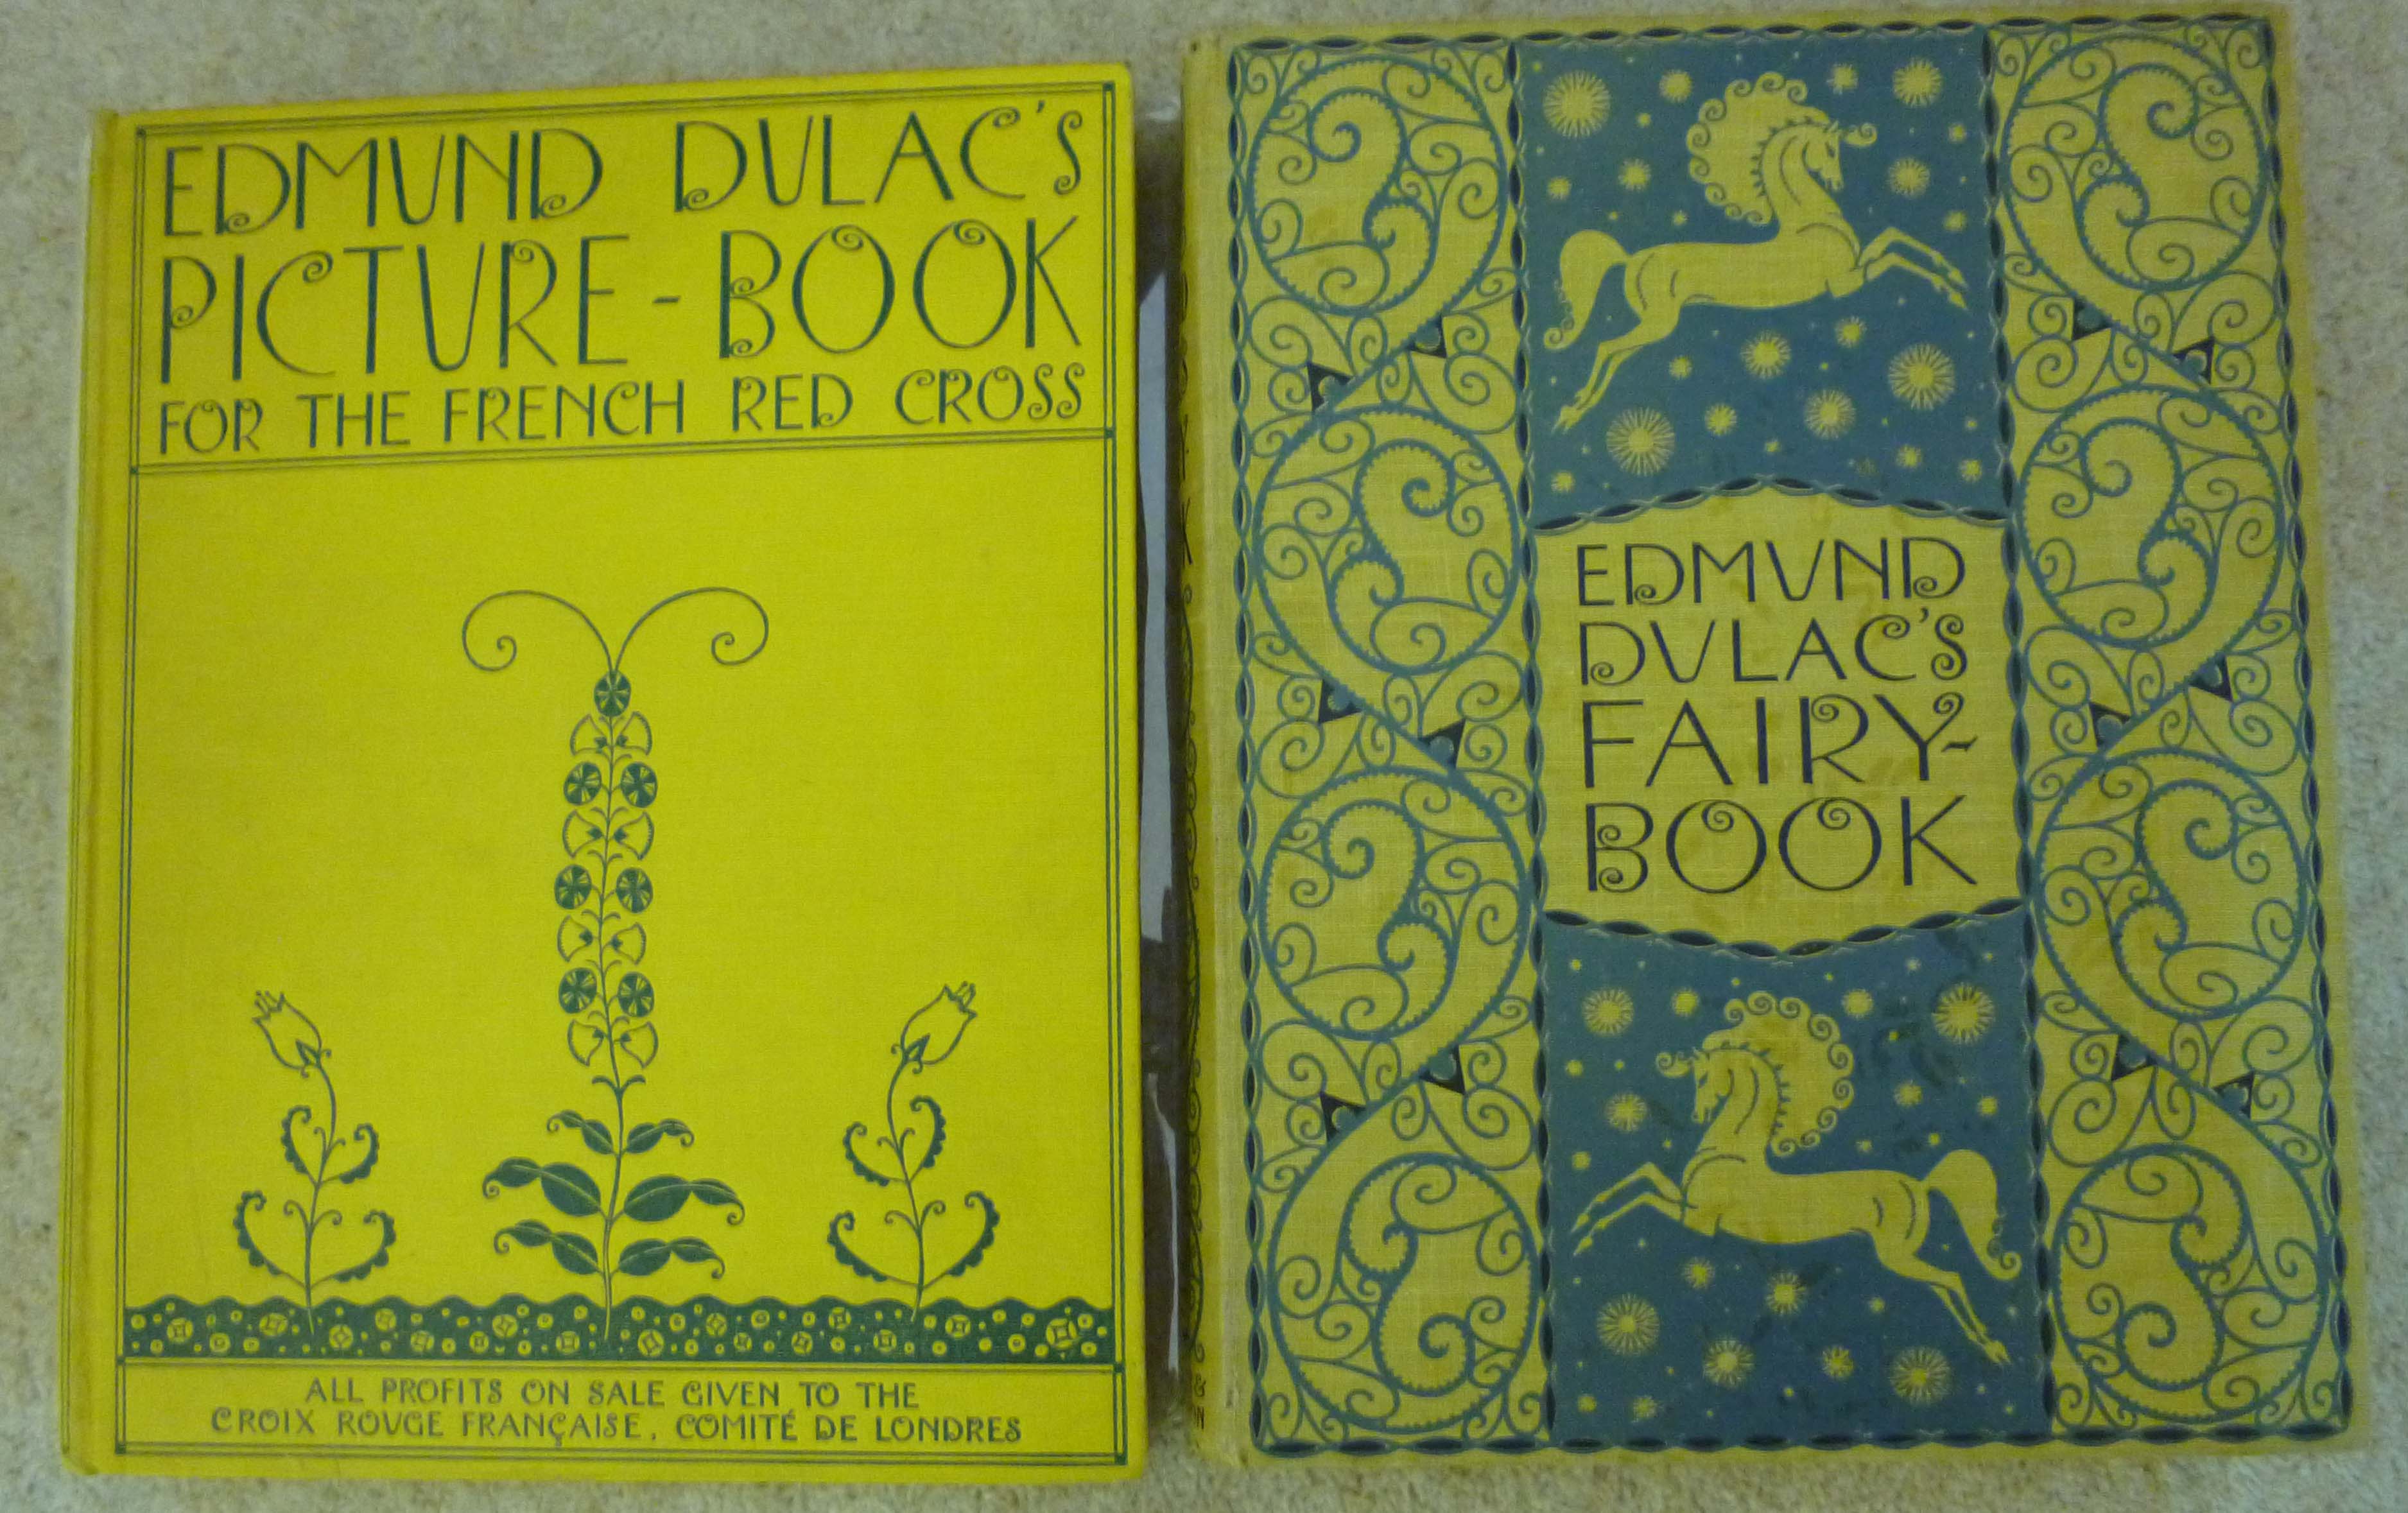 Edmund Dulac's picture book for the French Red Cross, with nineteen colour plates by Edmund Dulac